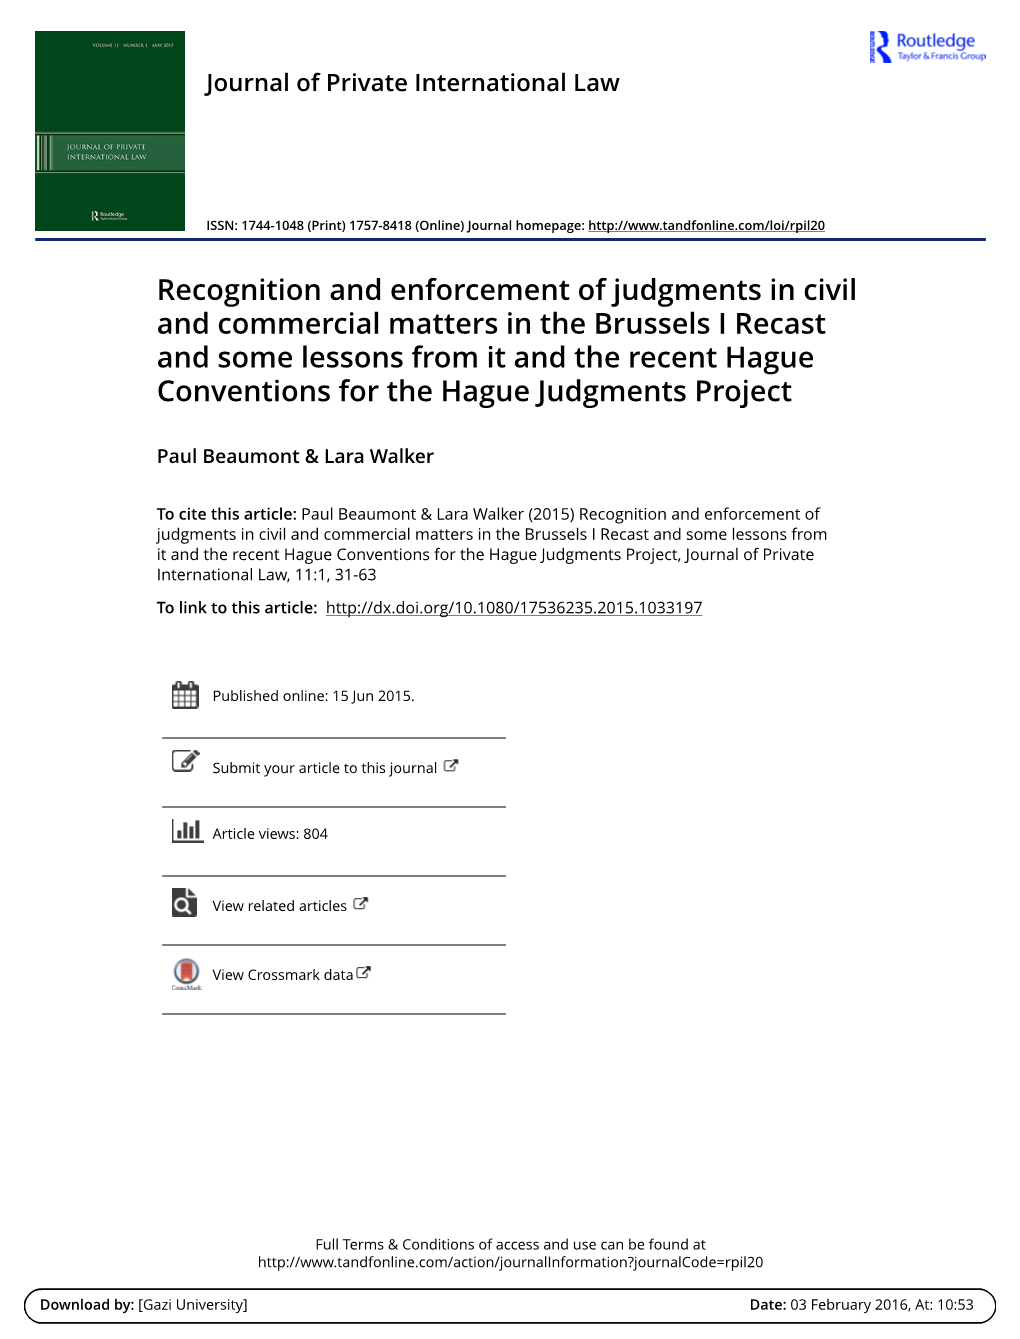 Recognition and Enforcement of Judgments in Civil and Commercial